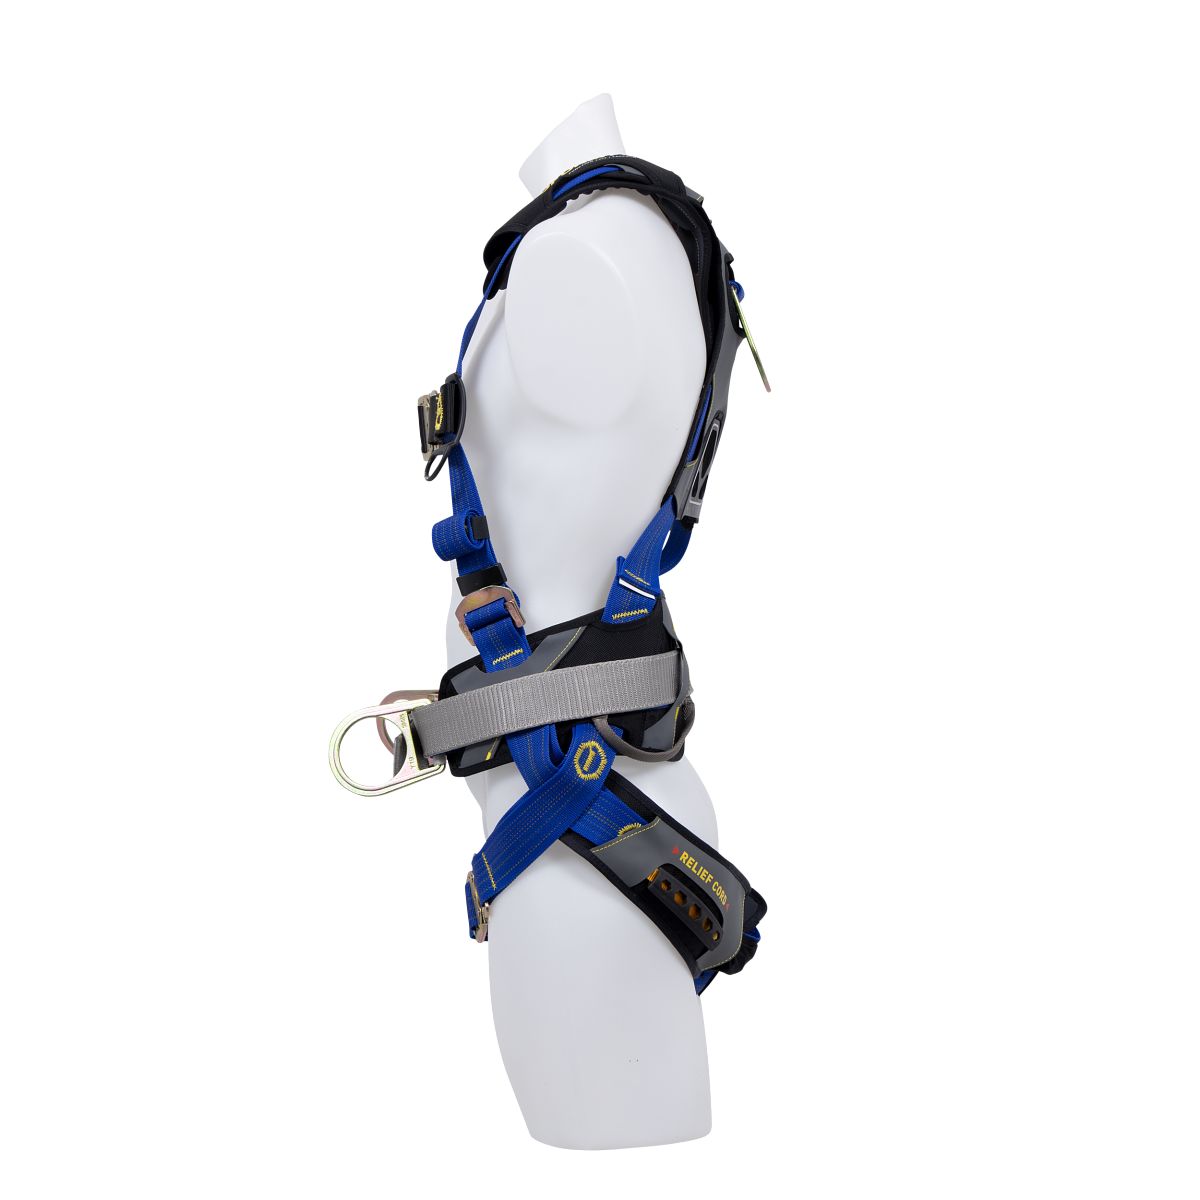 Performance Products® 227193 Hardtop Hoist Harness With Adjustable Straps -  ppembzparts